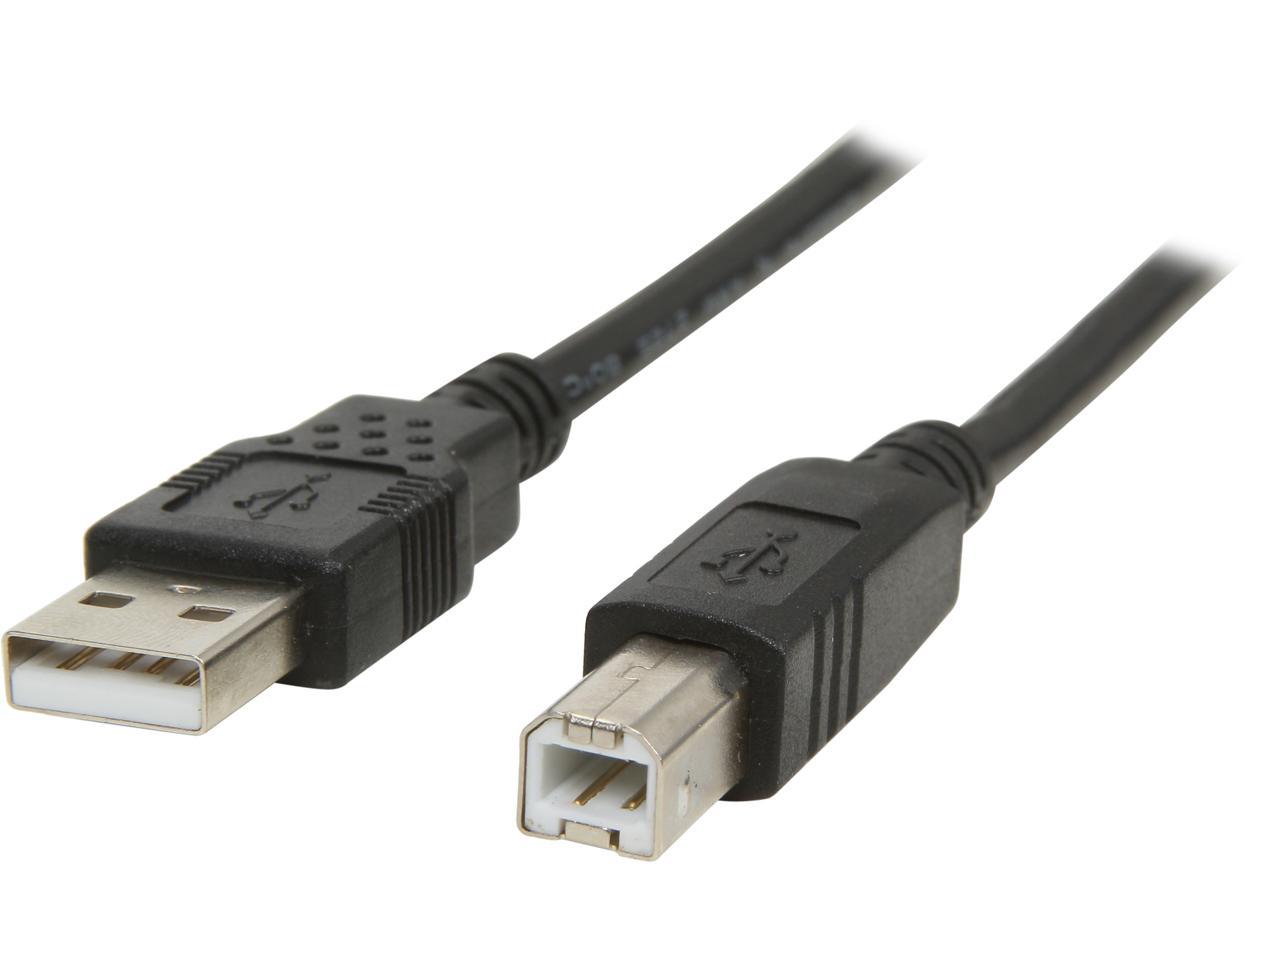 High Speed USB 2.0 A Male to B Male Data Transfer Printer Cable Cord  VG 